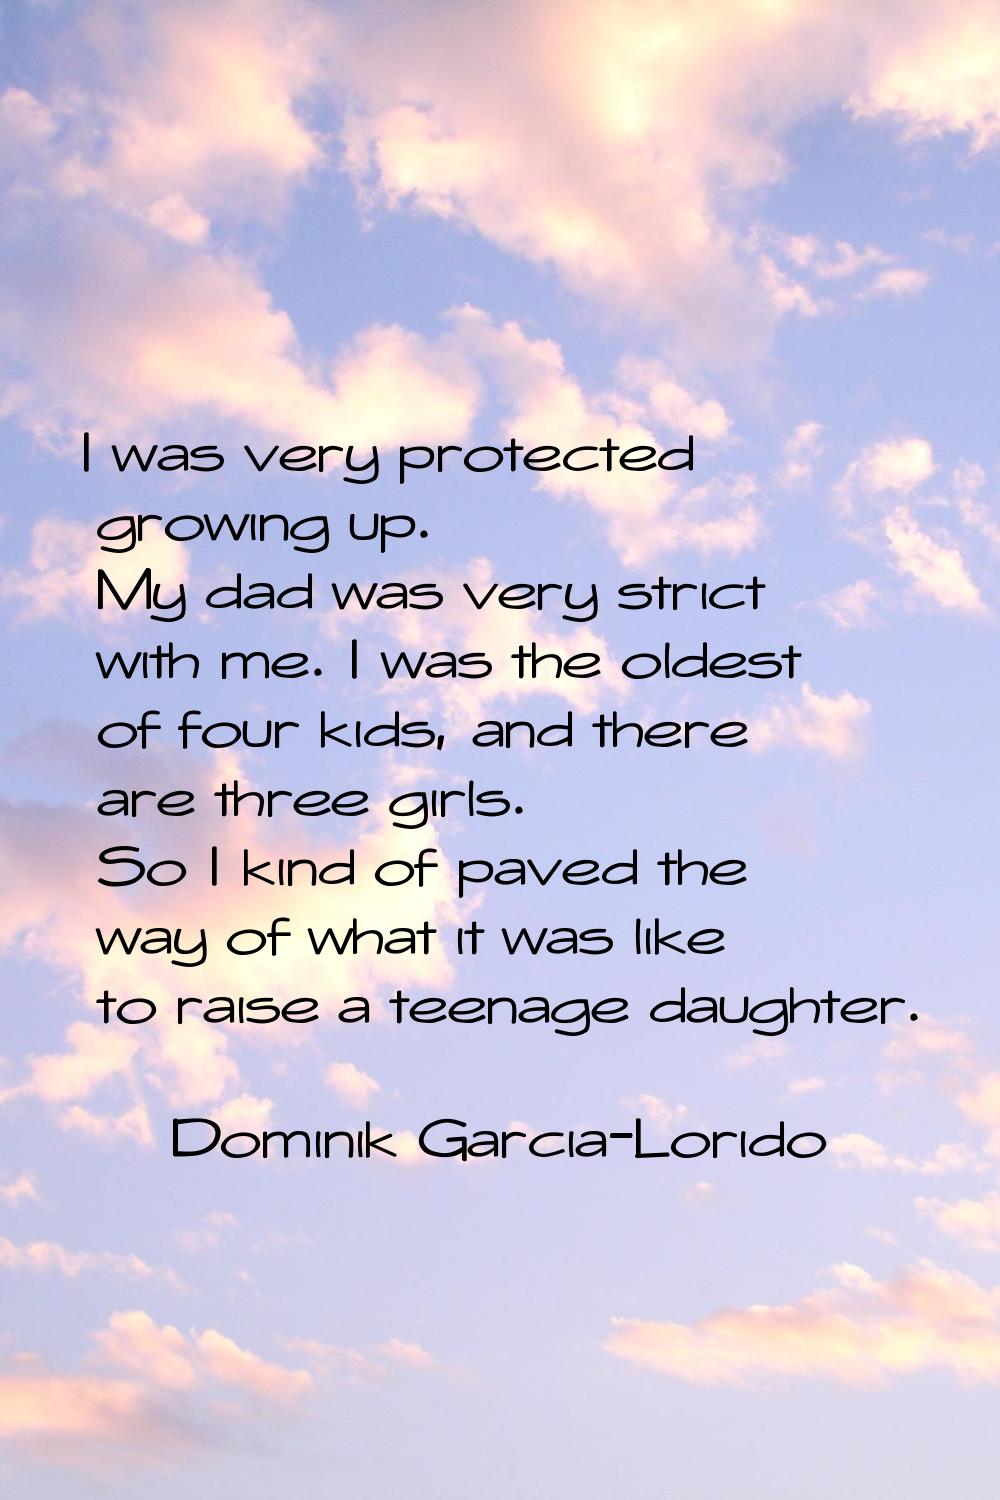 I was very protected growing up. My dad was very strict with me. I was the oldest of four kids, and